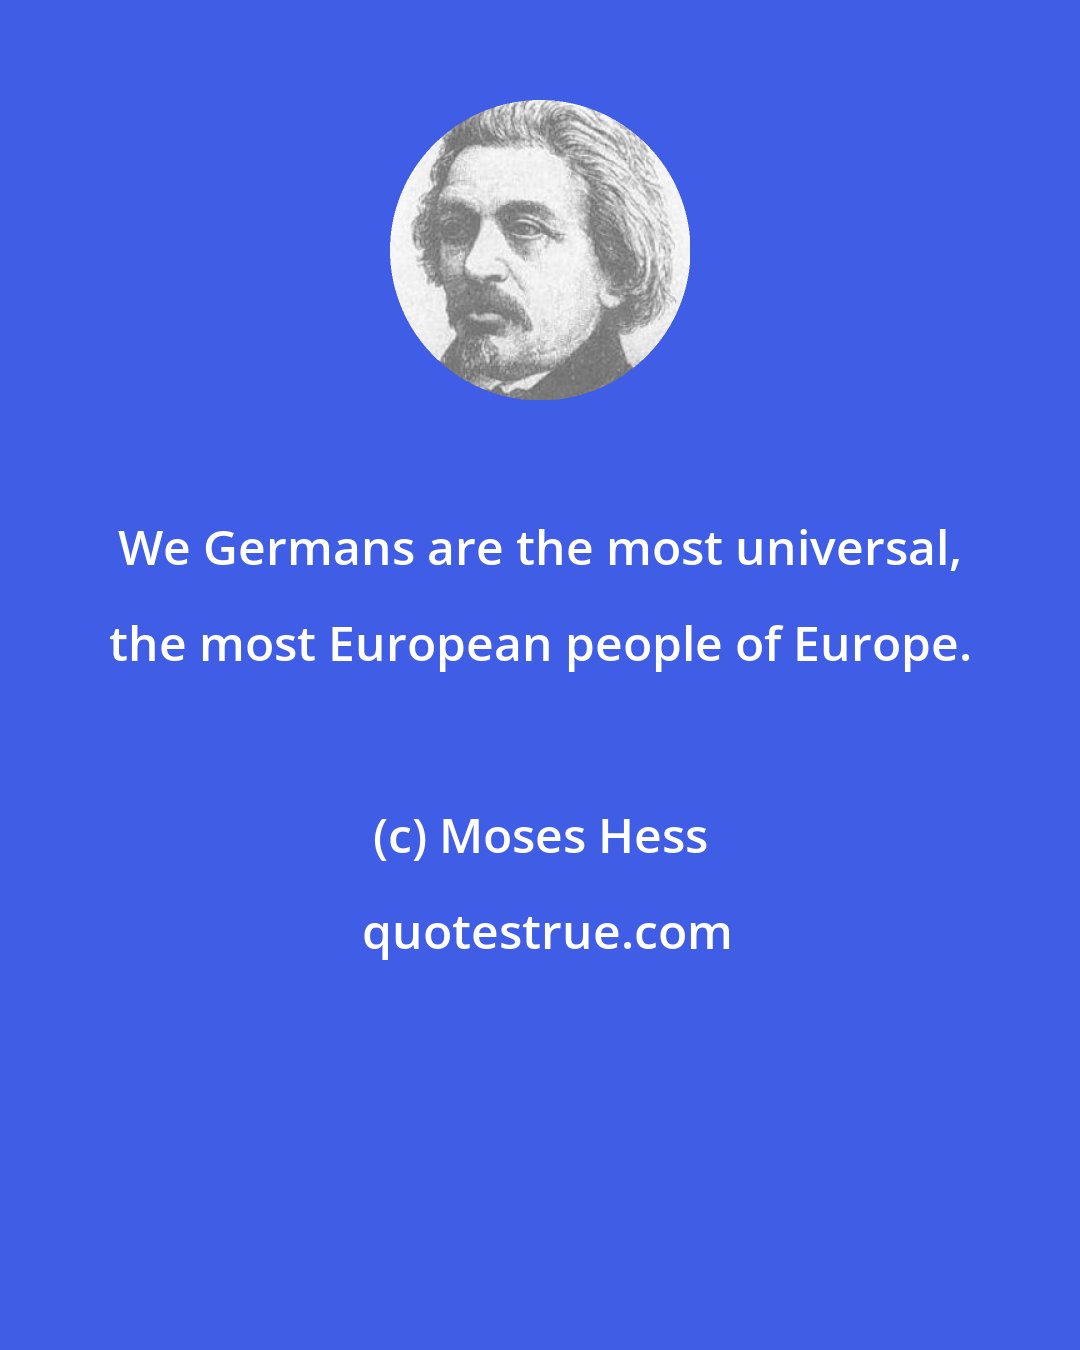 Moses Hess: We Germans are the most universal, the most European people of Europe.